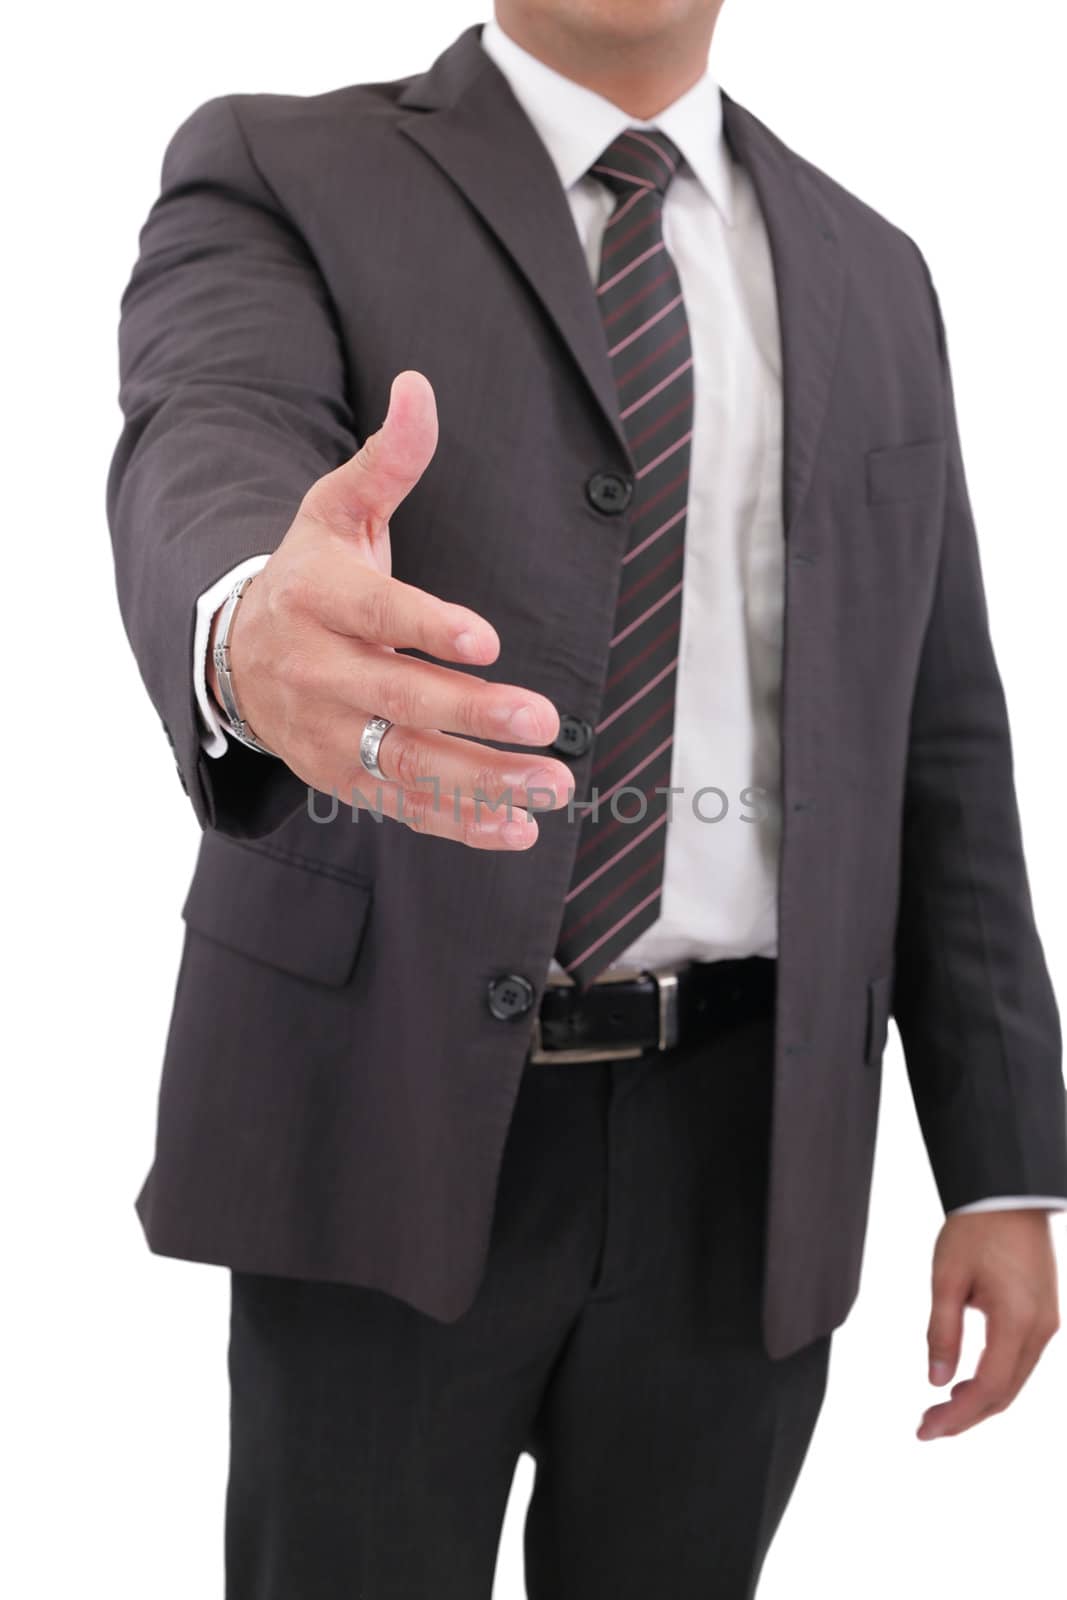 Business man with hand extended to handshake - isolated over white